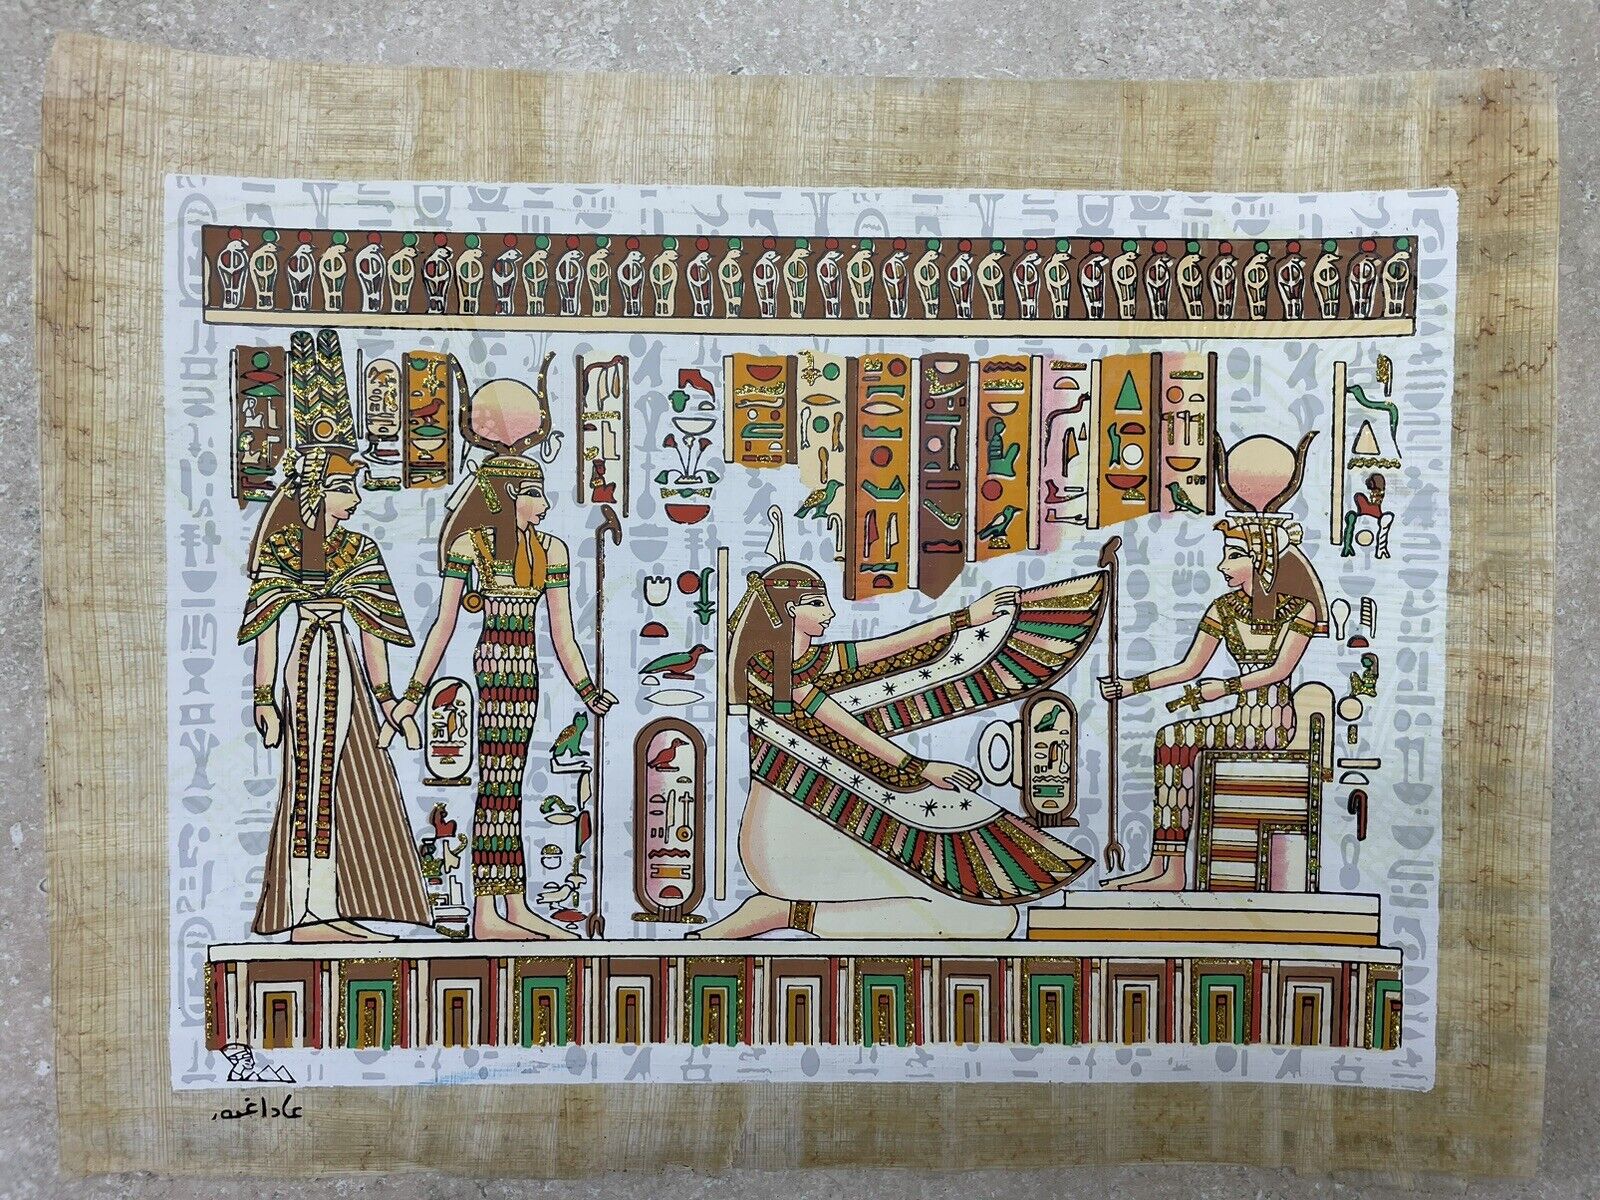 13”x17” 100% Authentic Egyptian Handmade Papyrus Painting That Glows In The Dark